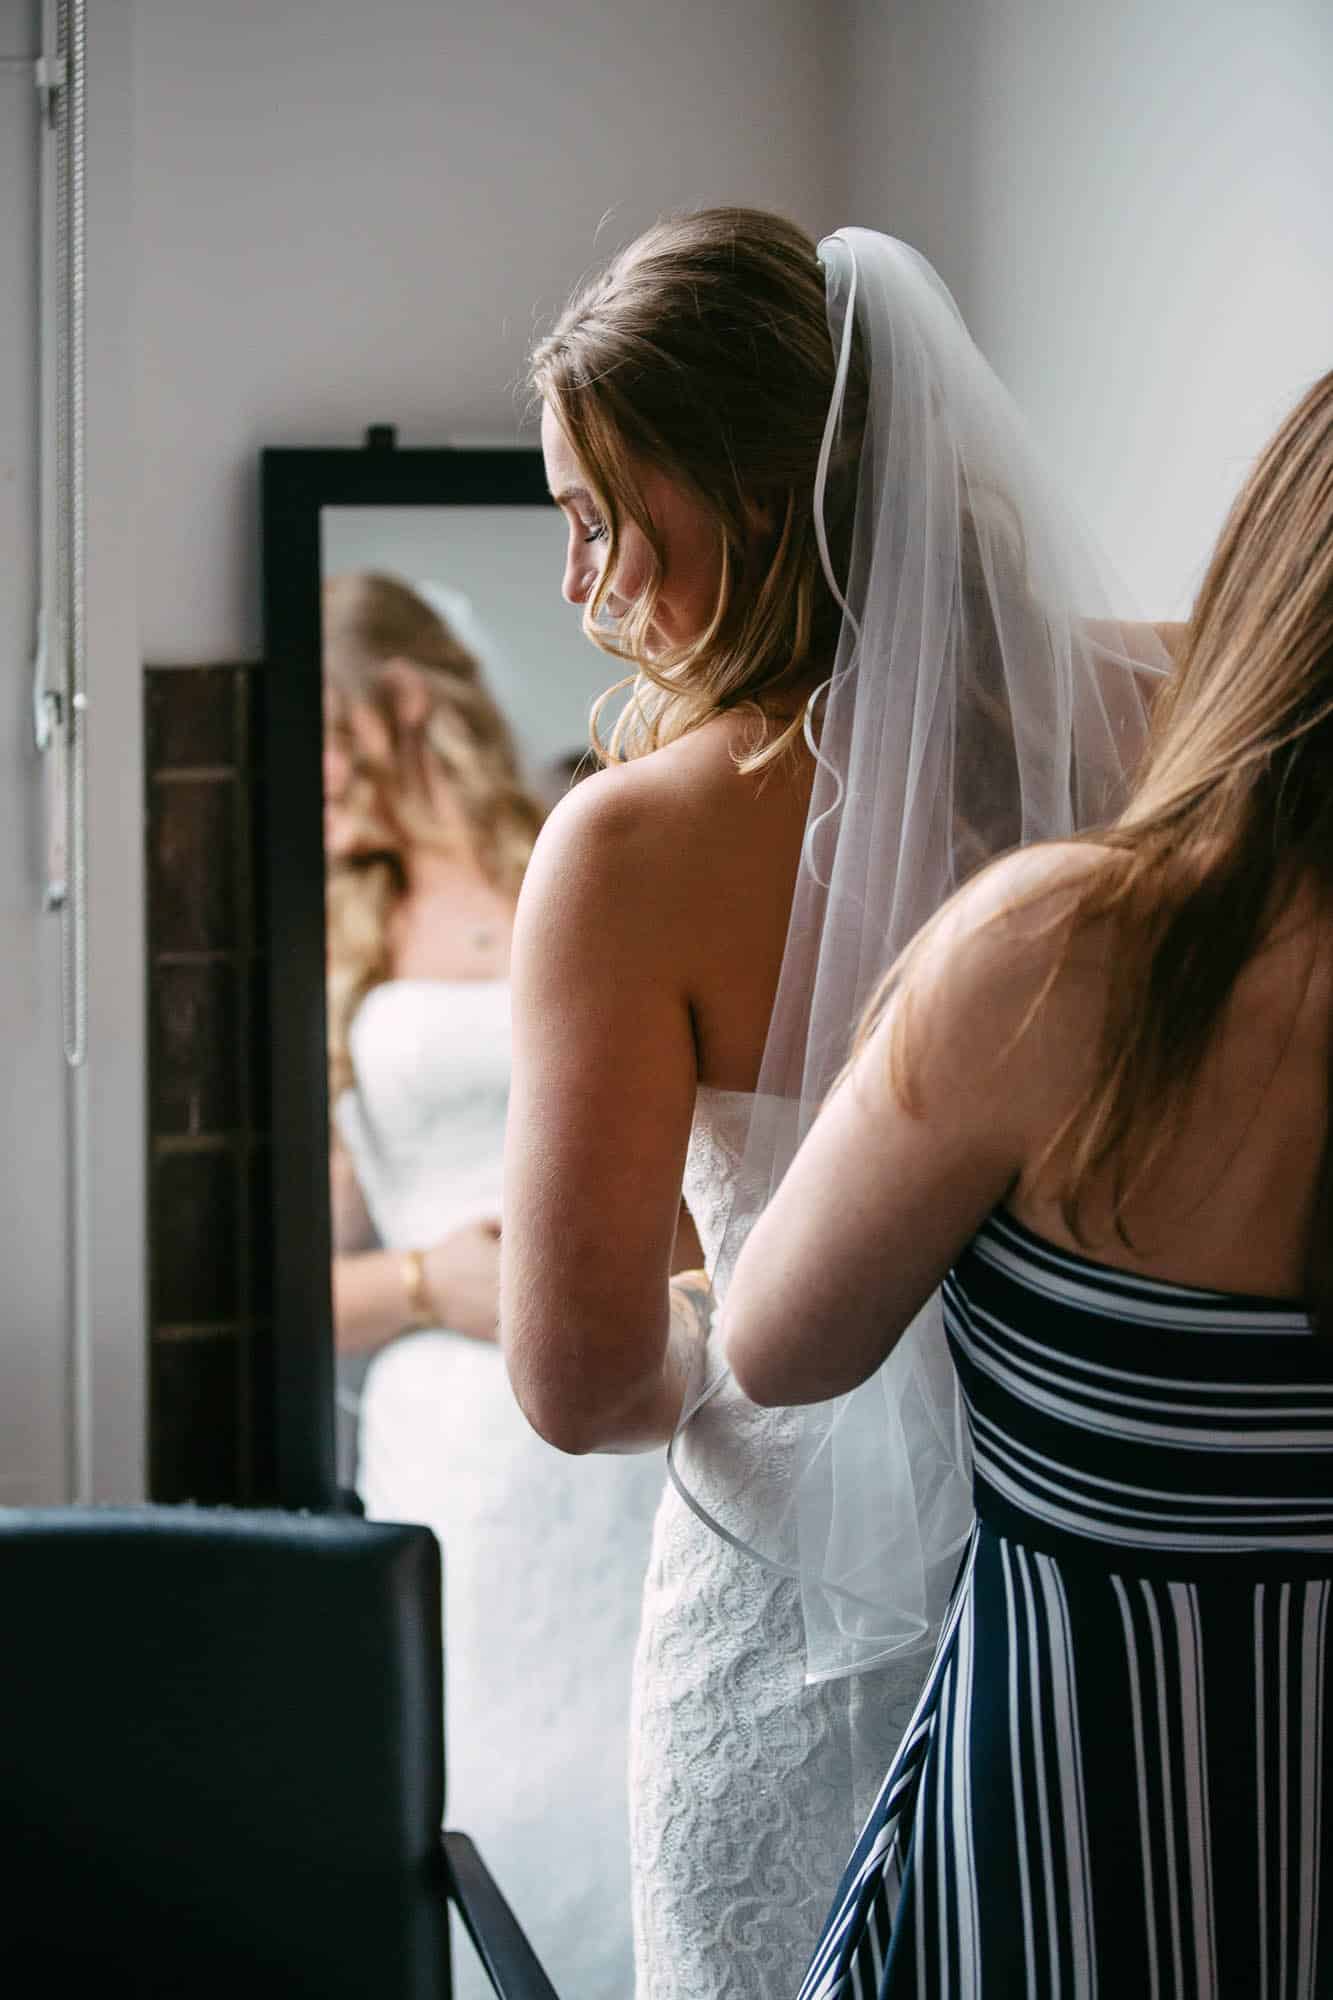 A master of ceremonies helping a bride get ready in front of a mirror.